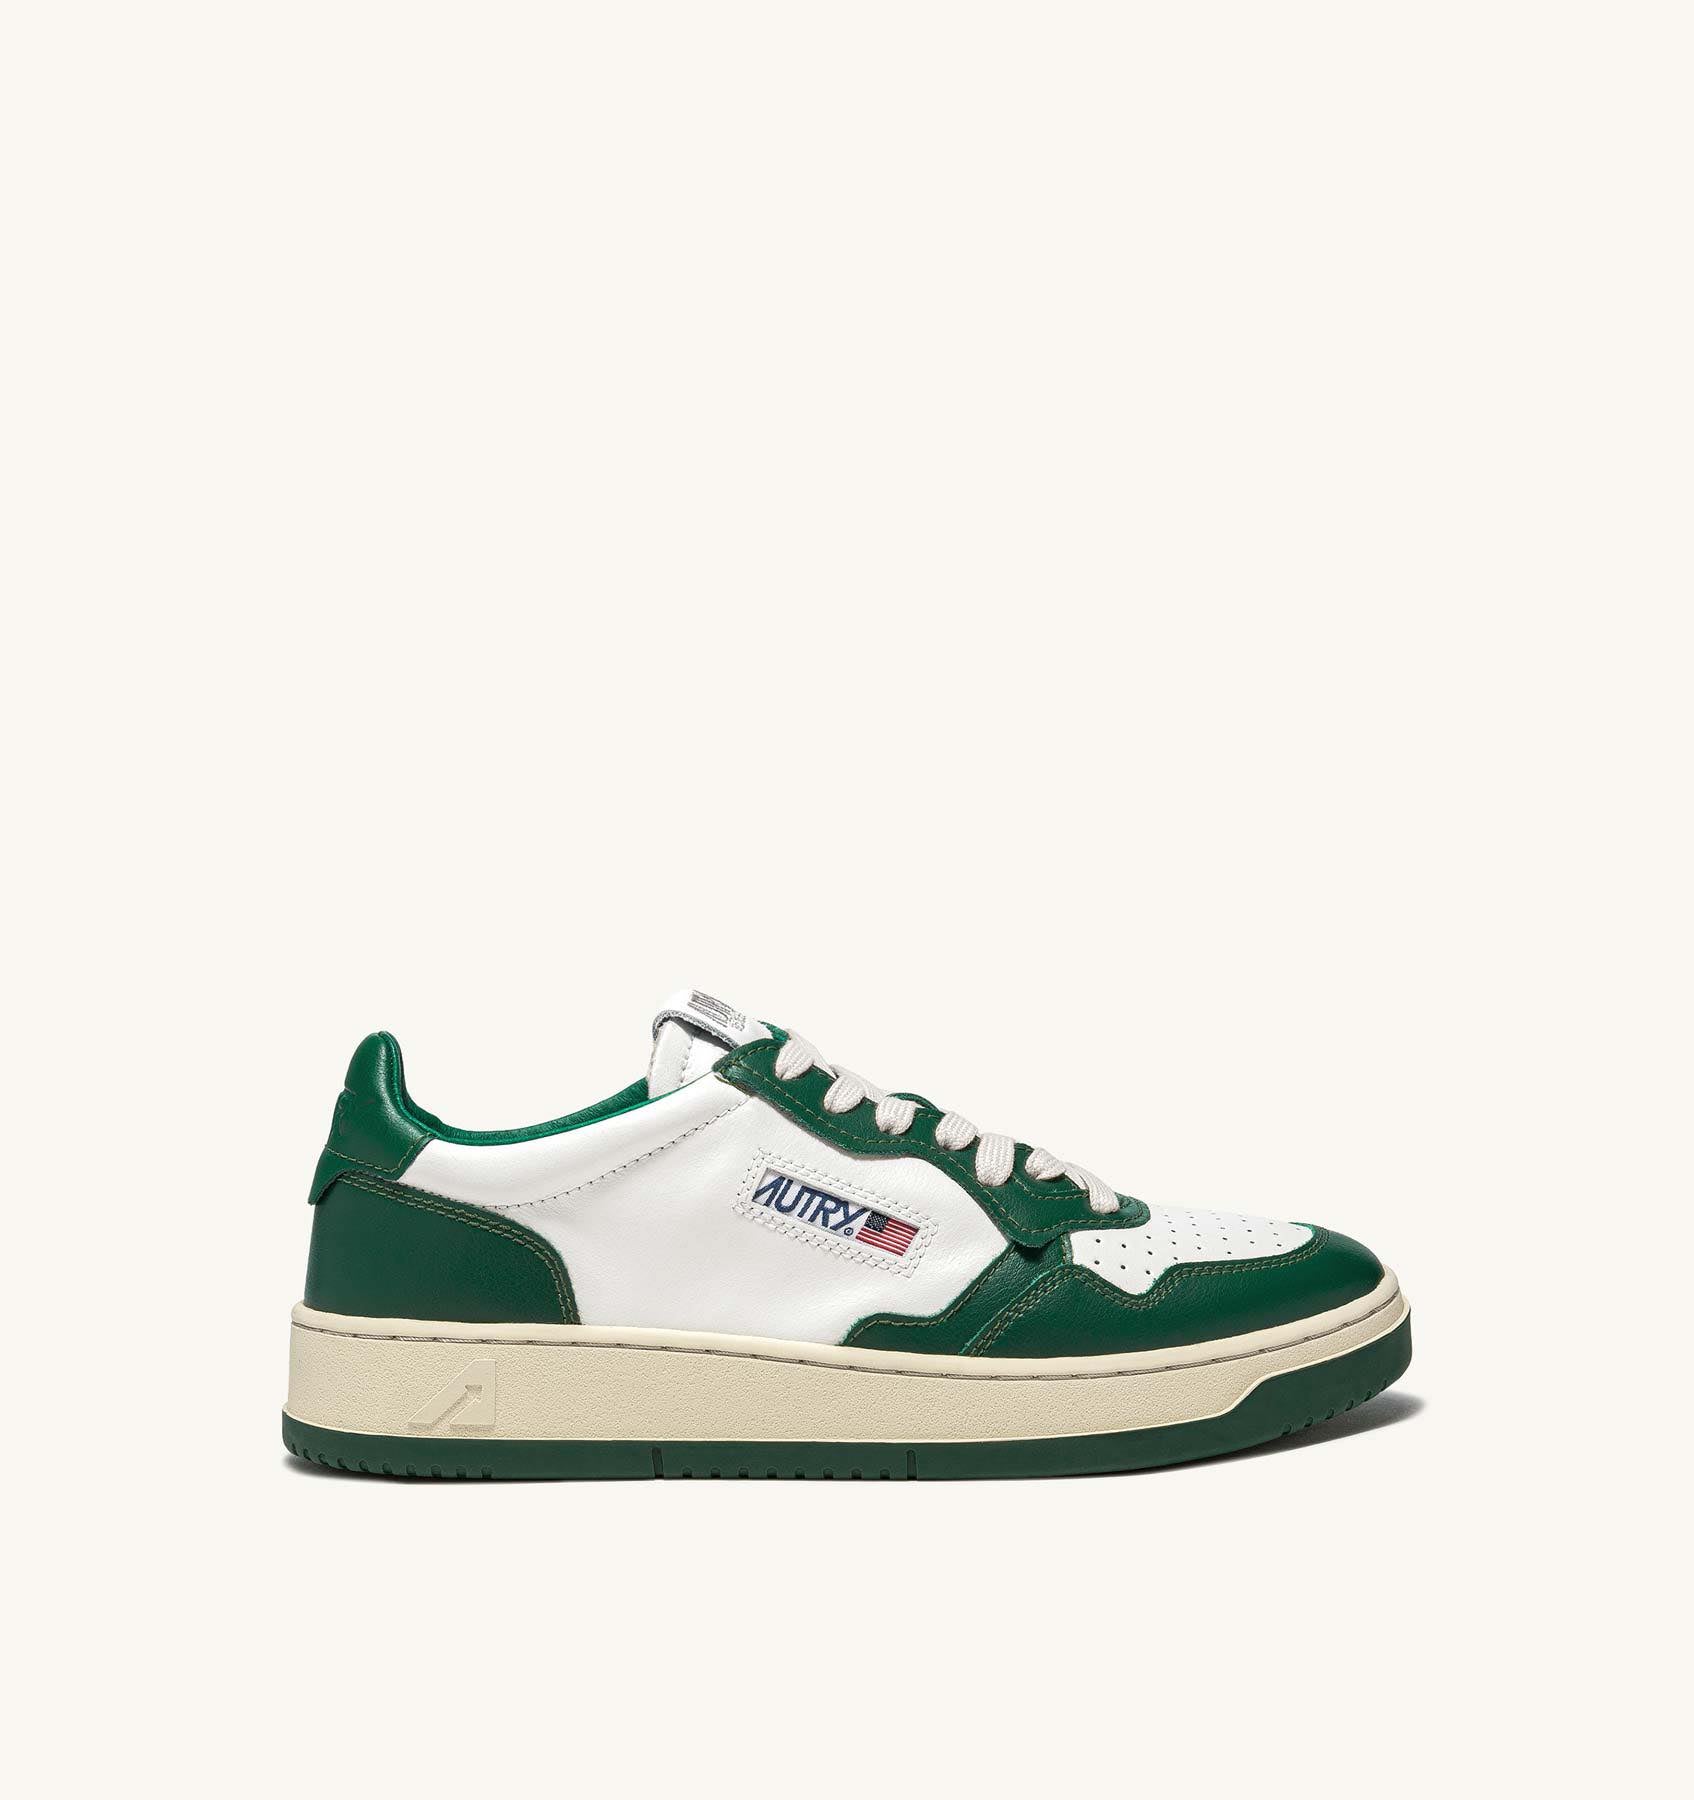 AUTRY MEDALIST LOW LEATHER BICOLOR - WHITE / GREEN